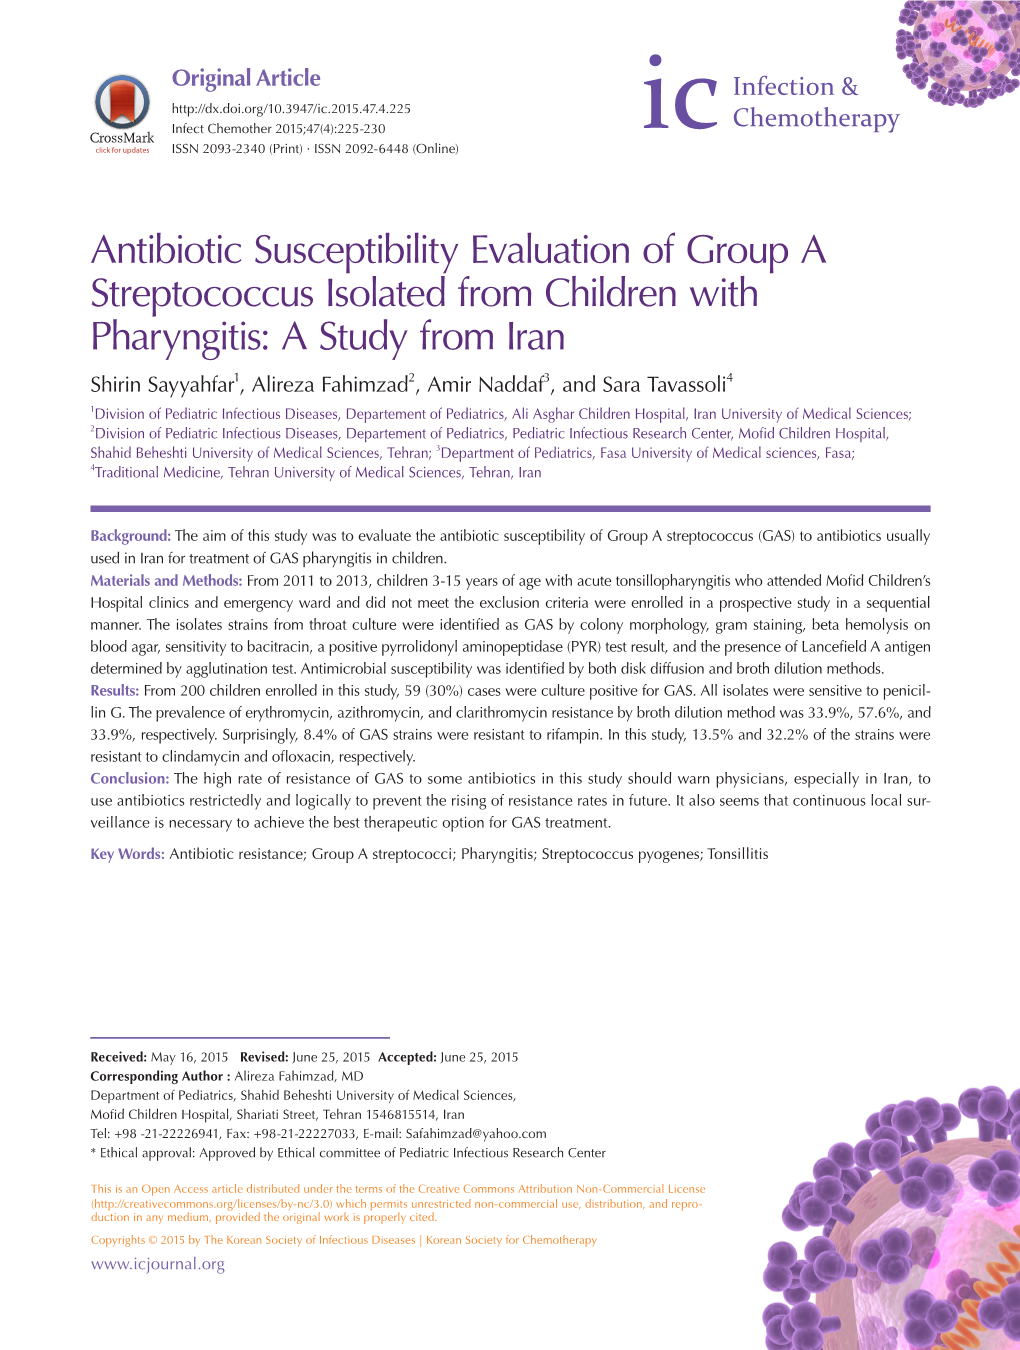 Antibiotic Susceptibility Evaluation of Group a Streptococcus Isolated